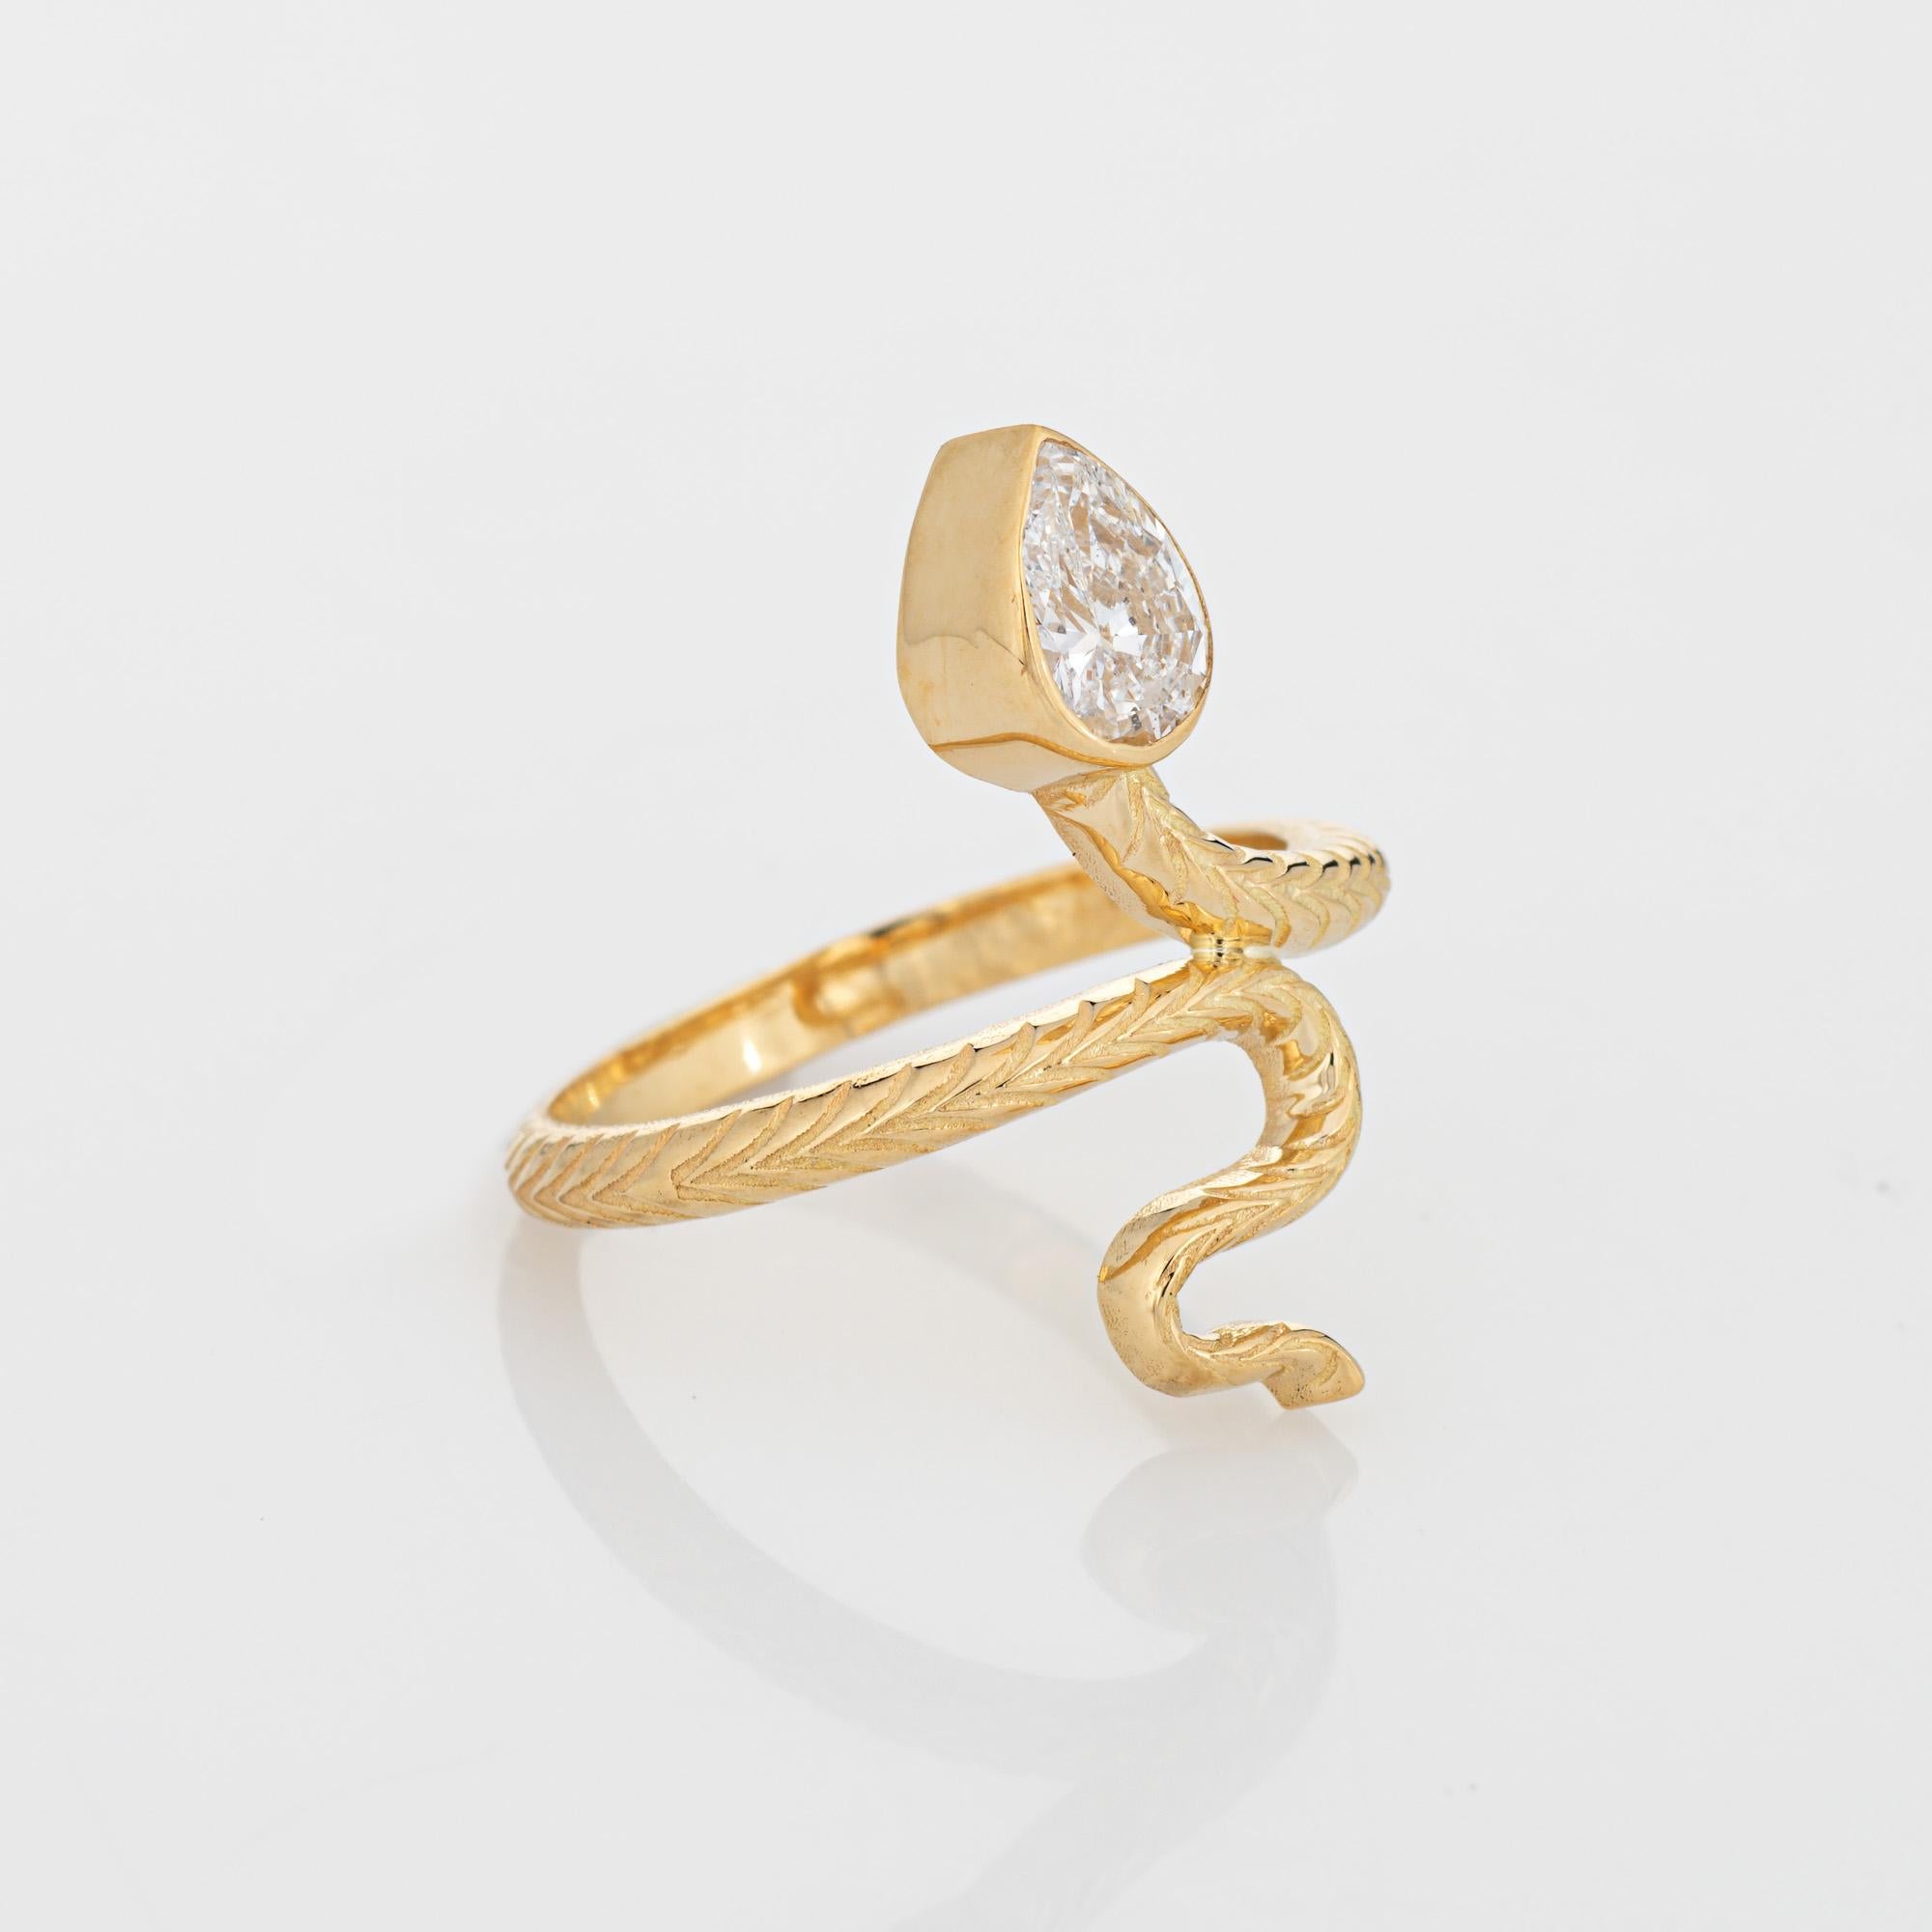 Modern GIA 0.58ct Diamond Snake Ring Estate 18k Yellow Gold Sz 6 Serpent Jewelry For Sale